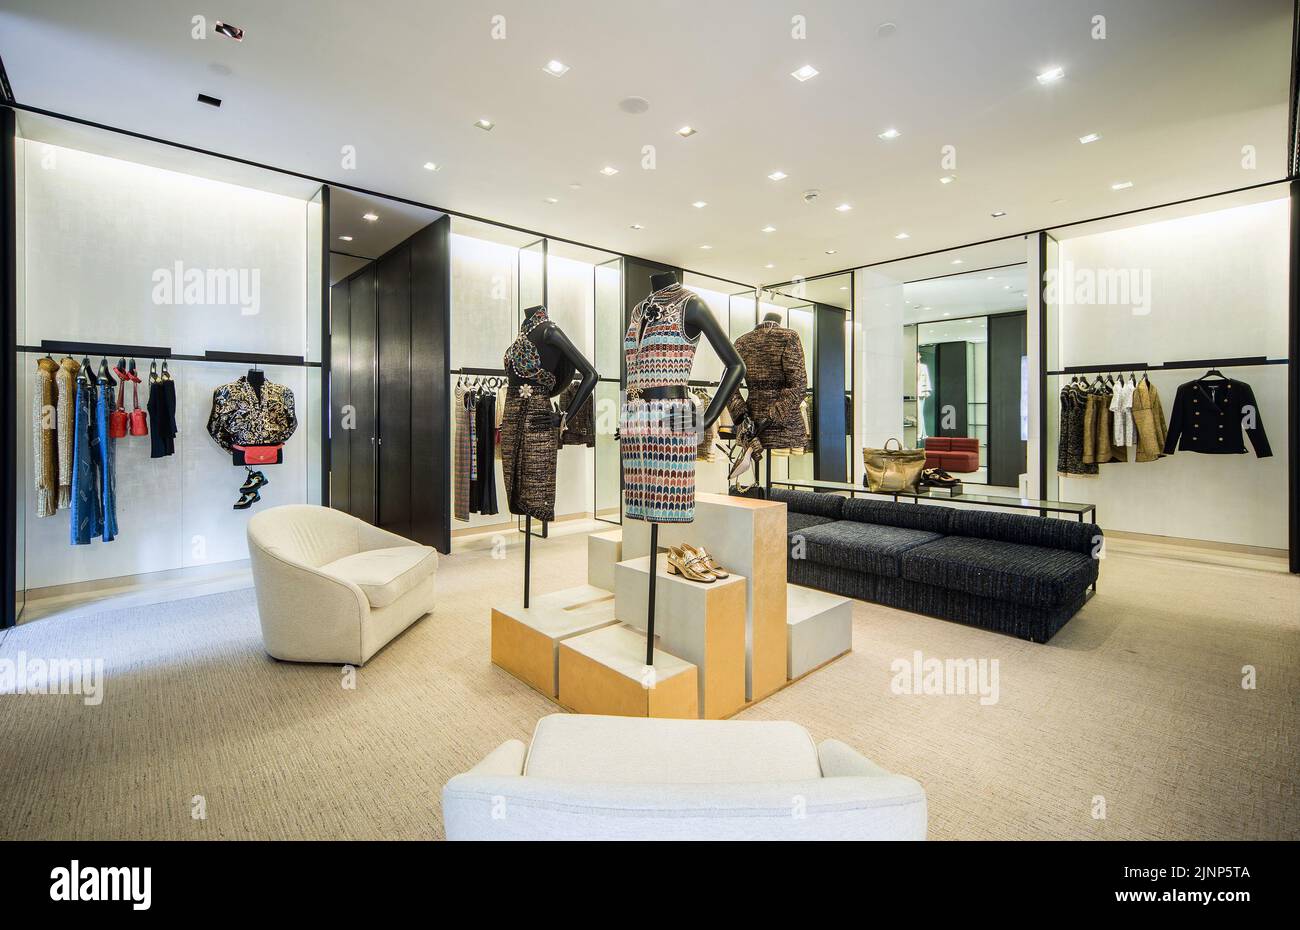 Kyiv, Ukraine, June 18, 2019. Interior of Chanel Boutique - luxury high fashion showroom. Hall of sale exposition. Stock Photo